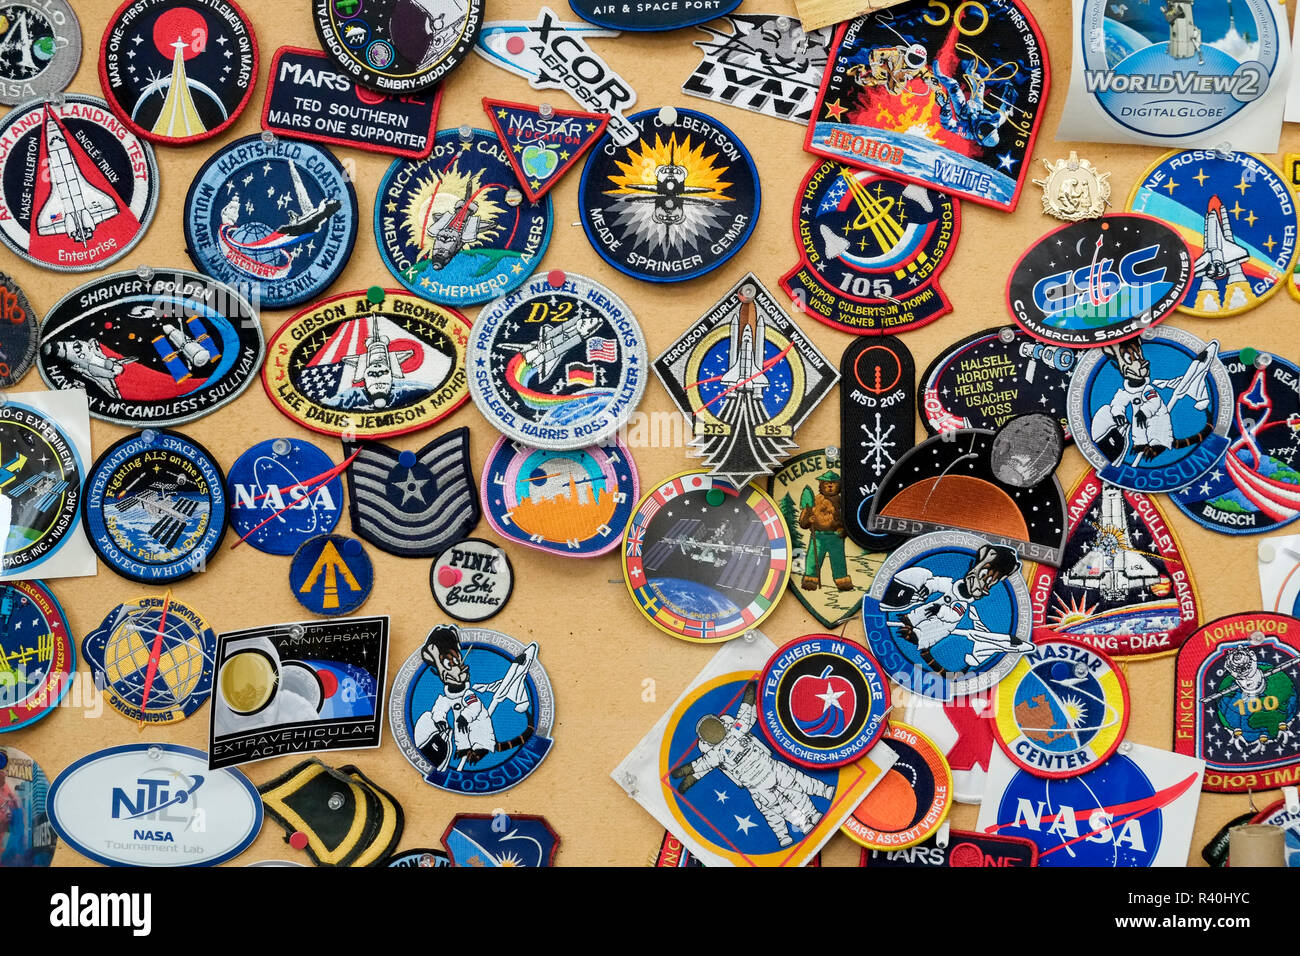 Patches at Final Frontier Design, manufacturers of space suits, Brooklyn, New York. USA. (Editorial Use Only) Stock Photo